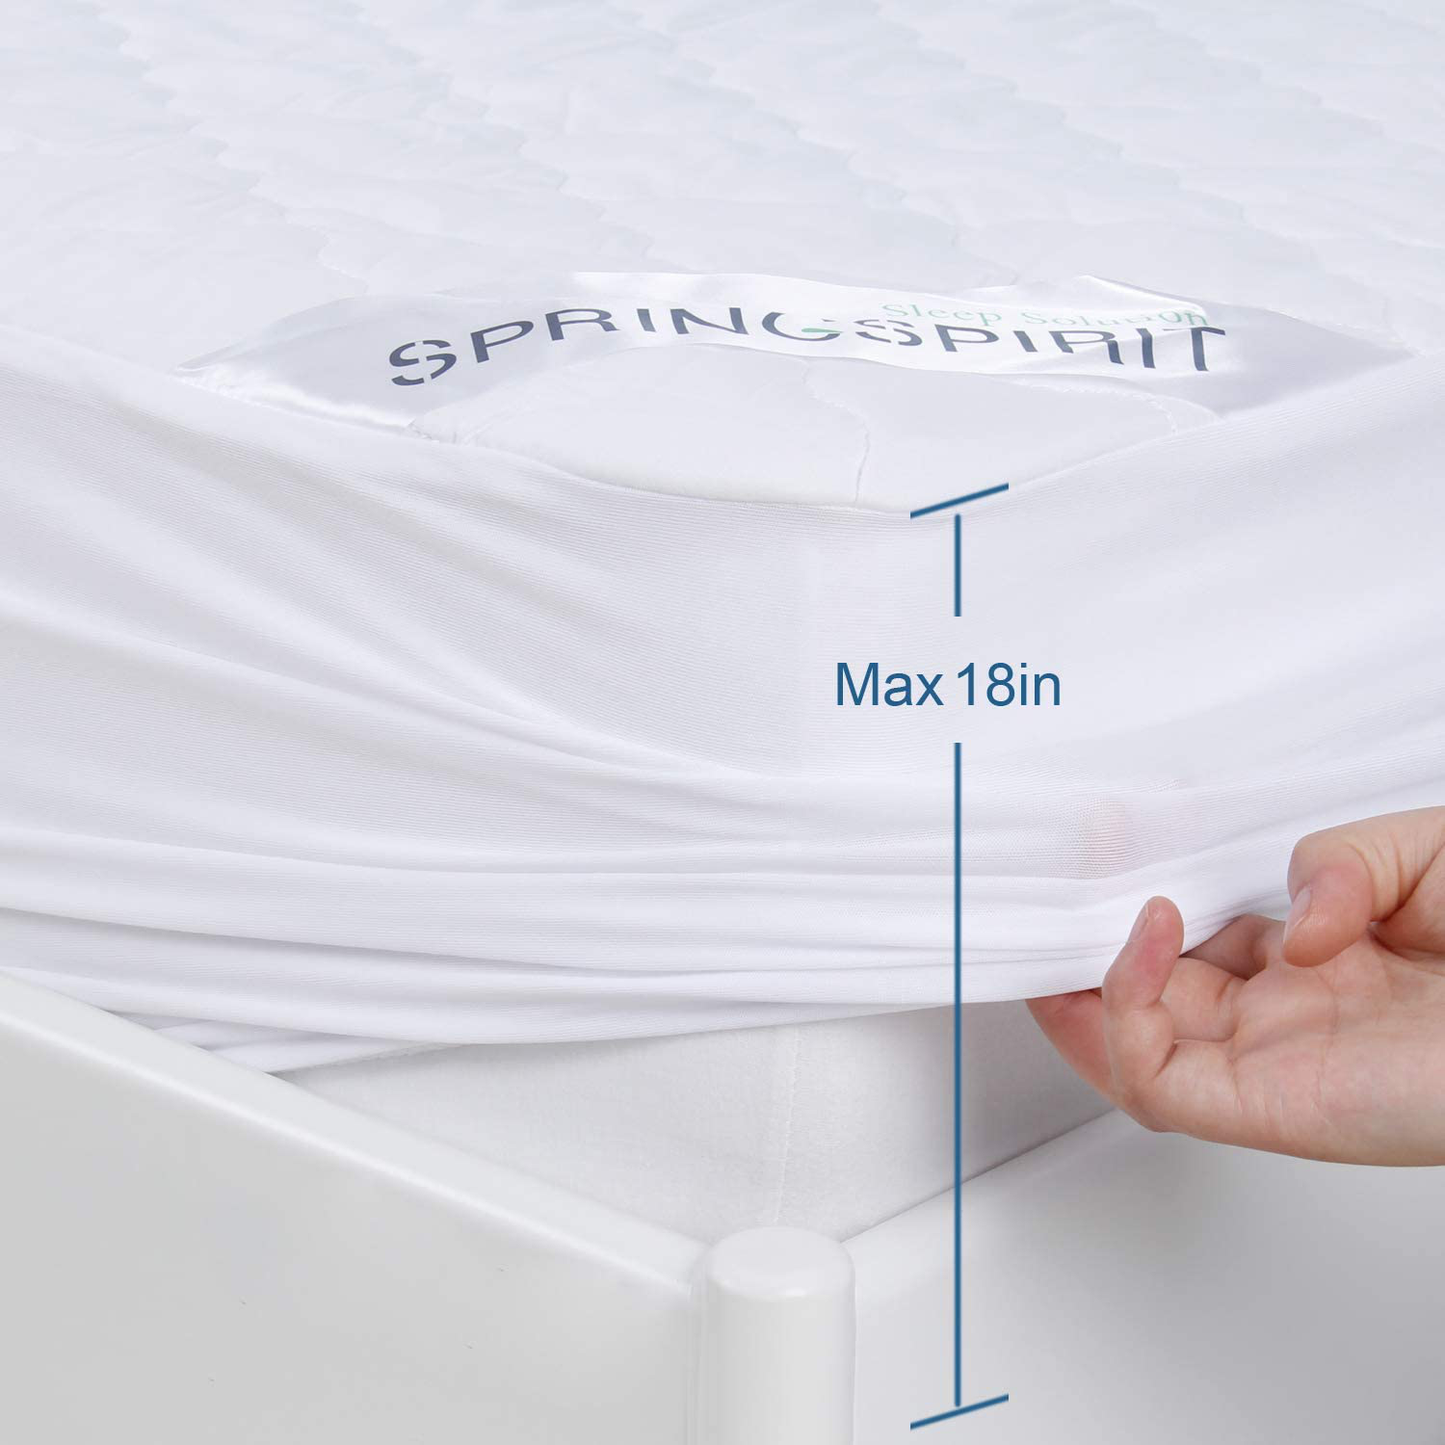 SPRINGSPIRIT Mattress Protector Twin Size, Quilted Fitted Waterproof Twin Mattress Pad Cover with Ultra Soft & Aborsbent Surface, Mattress Topper Stain Protection Deep Pocket Strethes up to 18" Depth